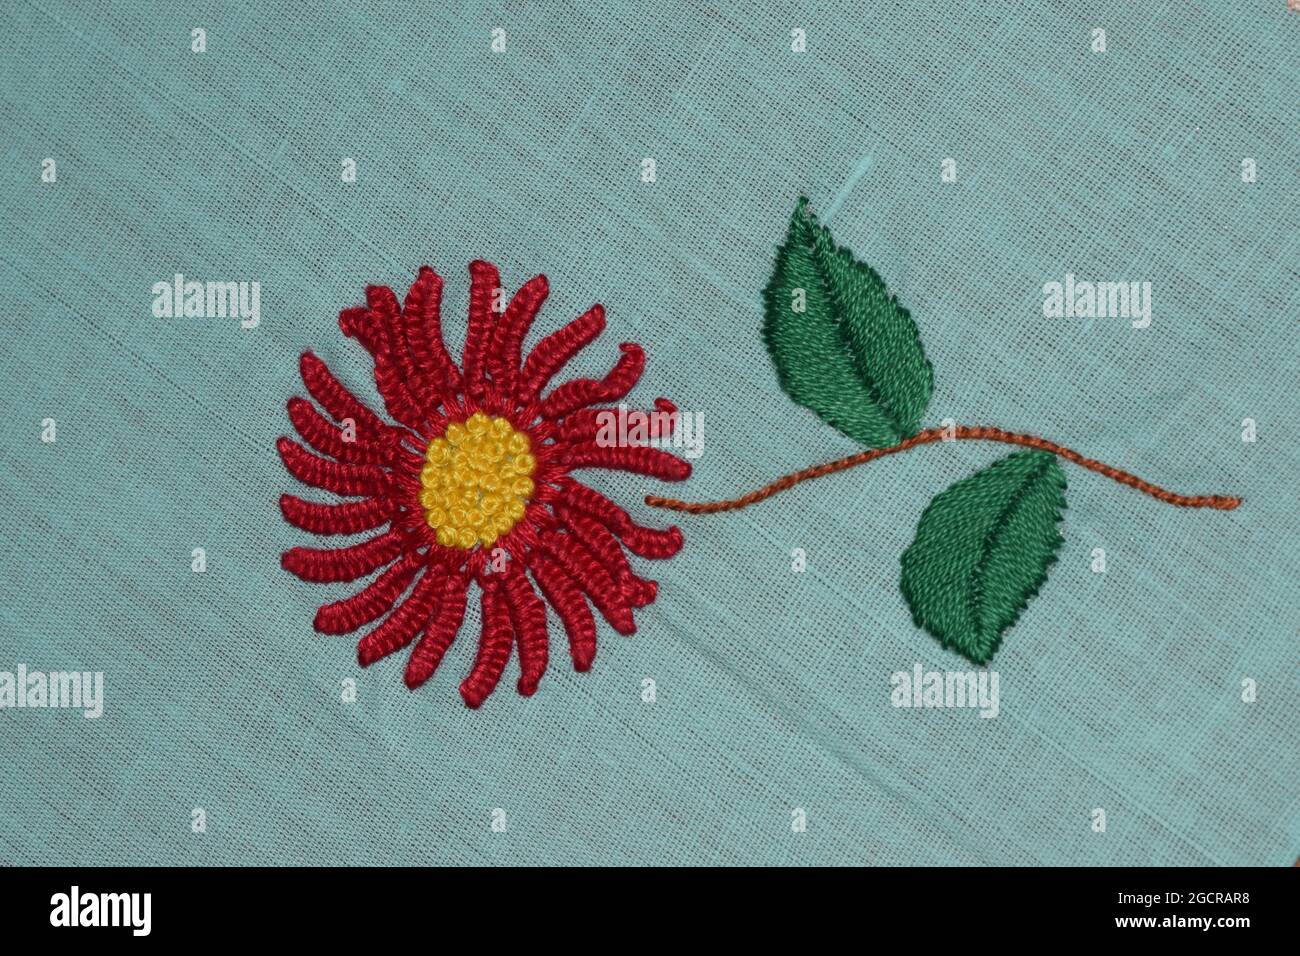 Hand embroider flower design in textile fabric Stock Photo